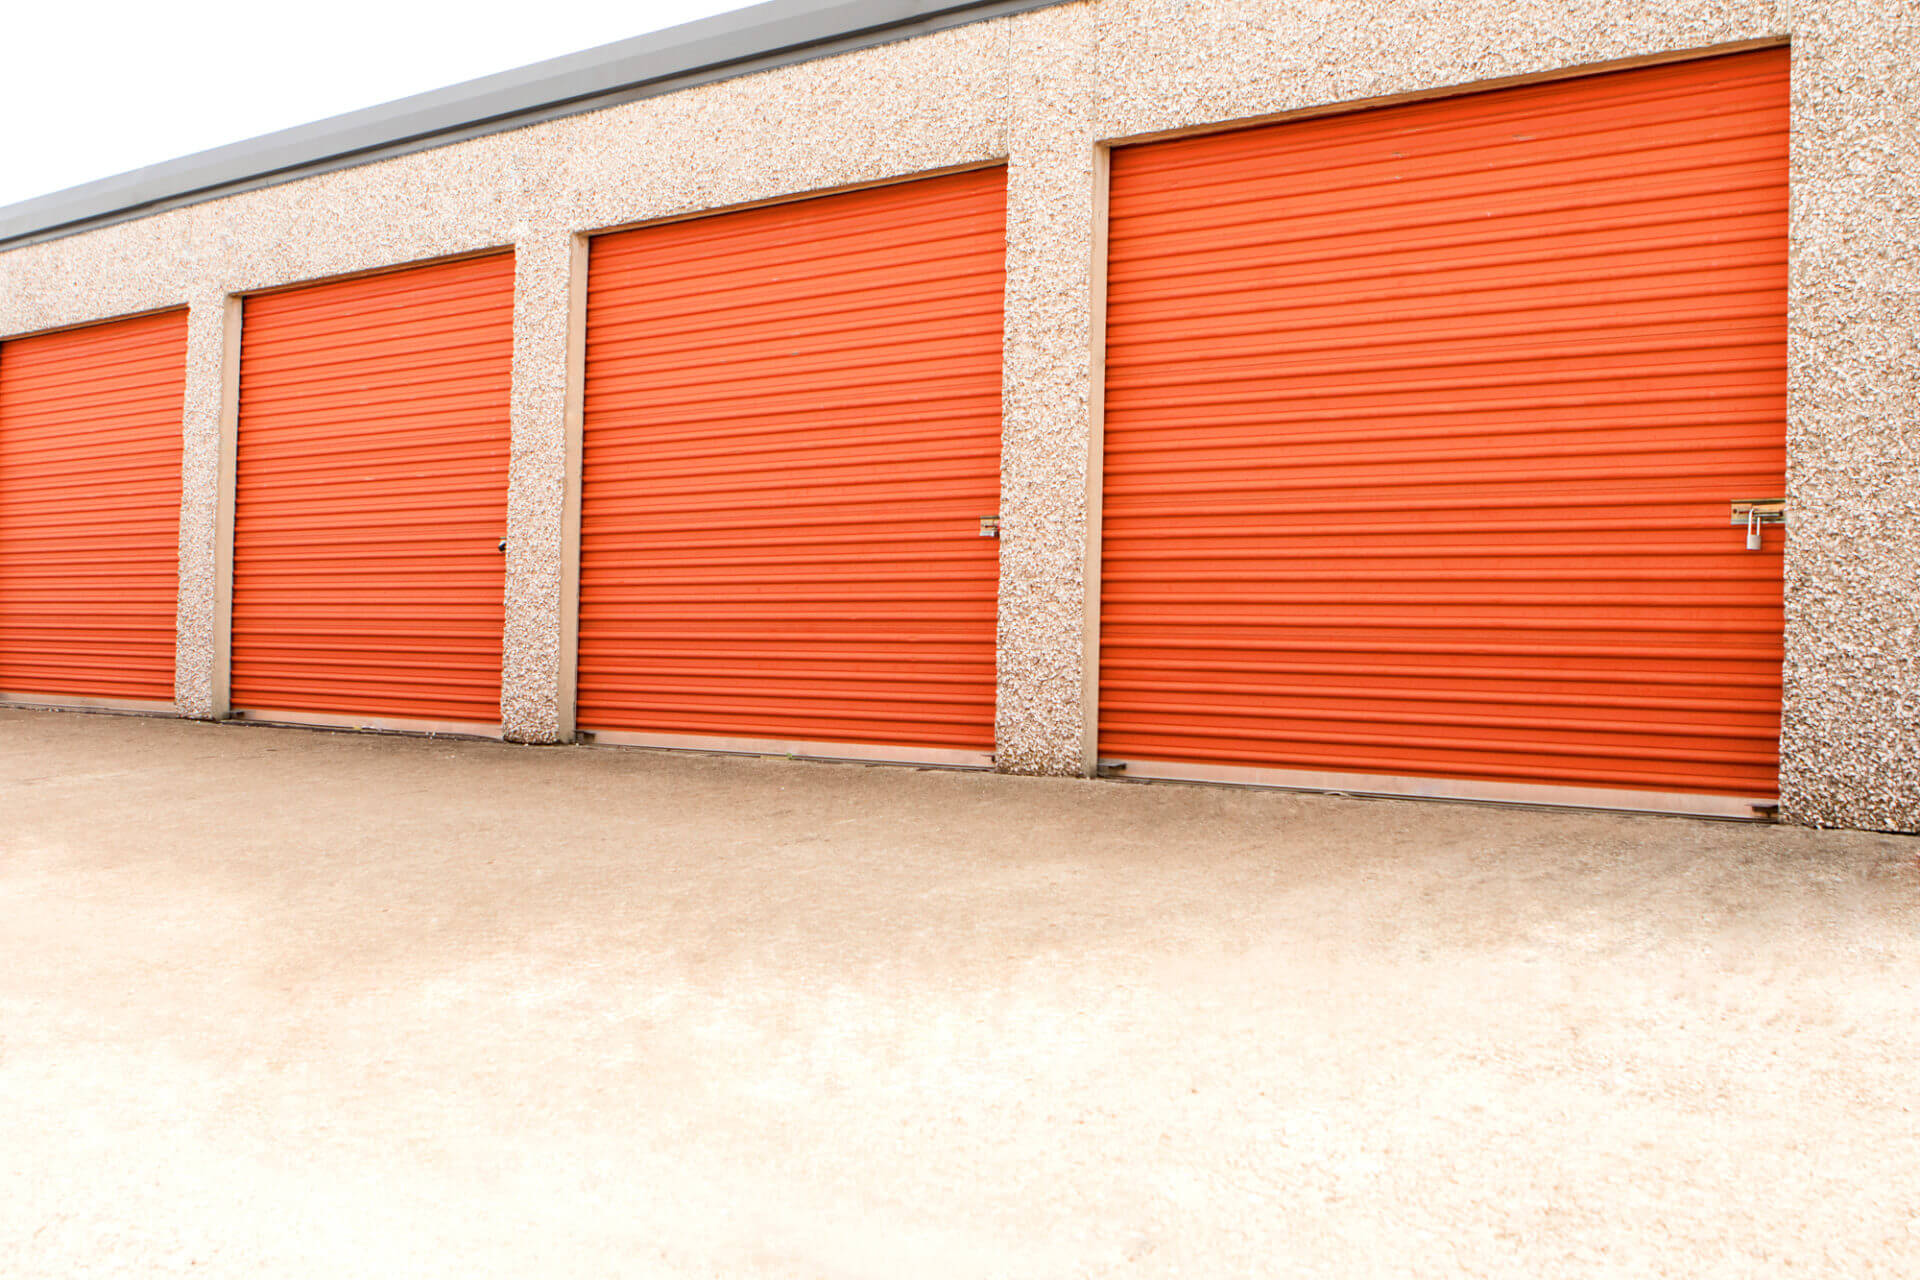 Self-Storage for Cars: Costs, Unit Sizes & More